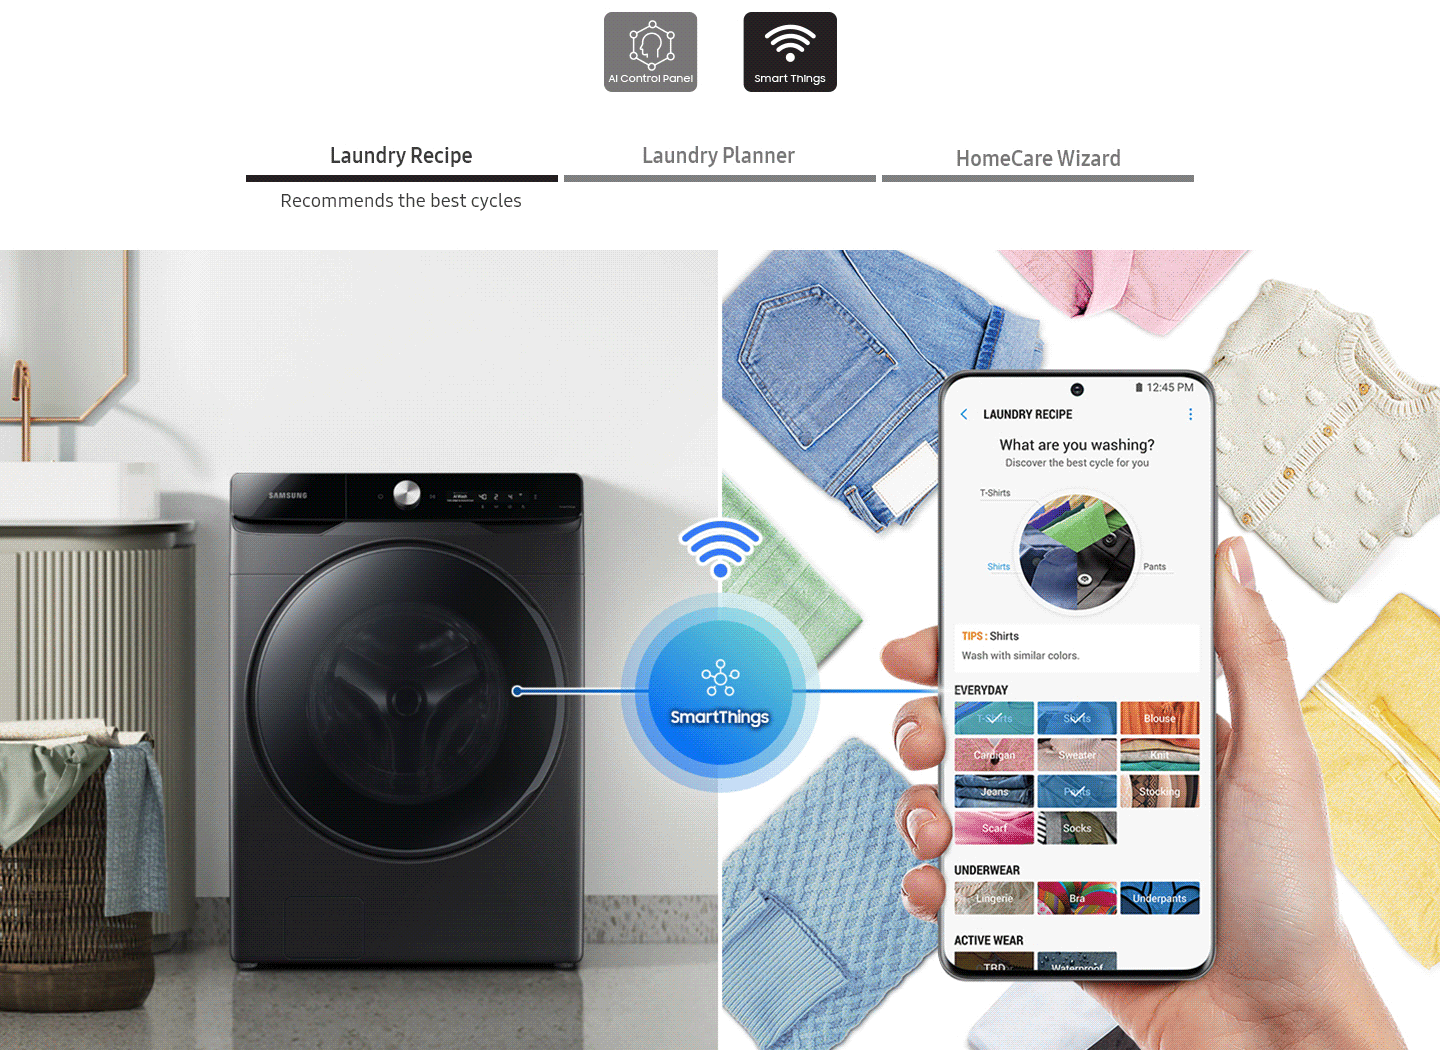 Description: The wash cycle controlled via the SmartThings app. Laundry recipe, Laundry planner, HomeCare Wizard.